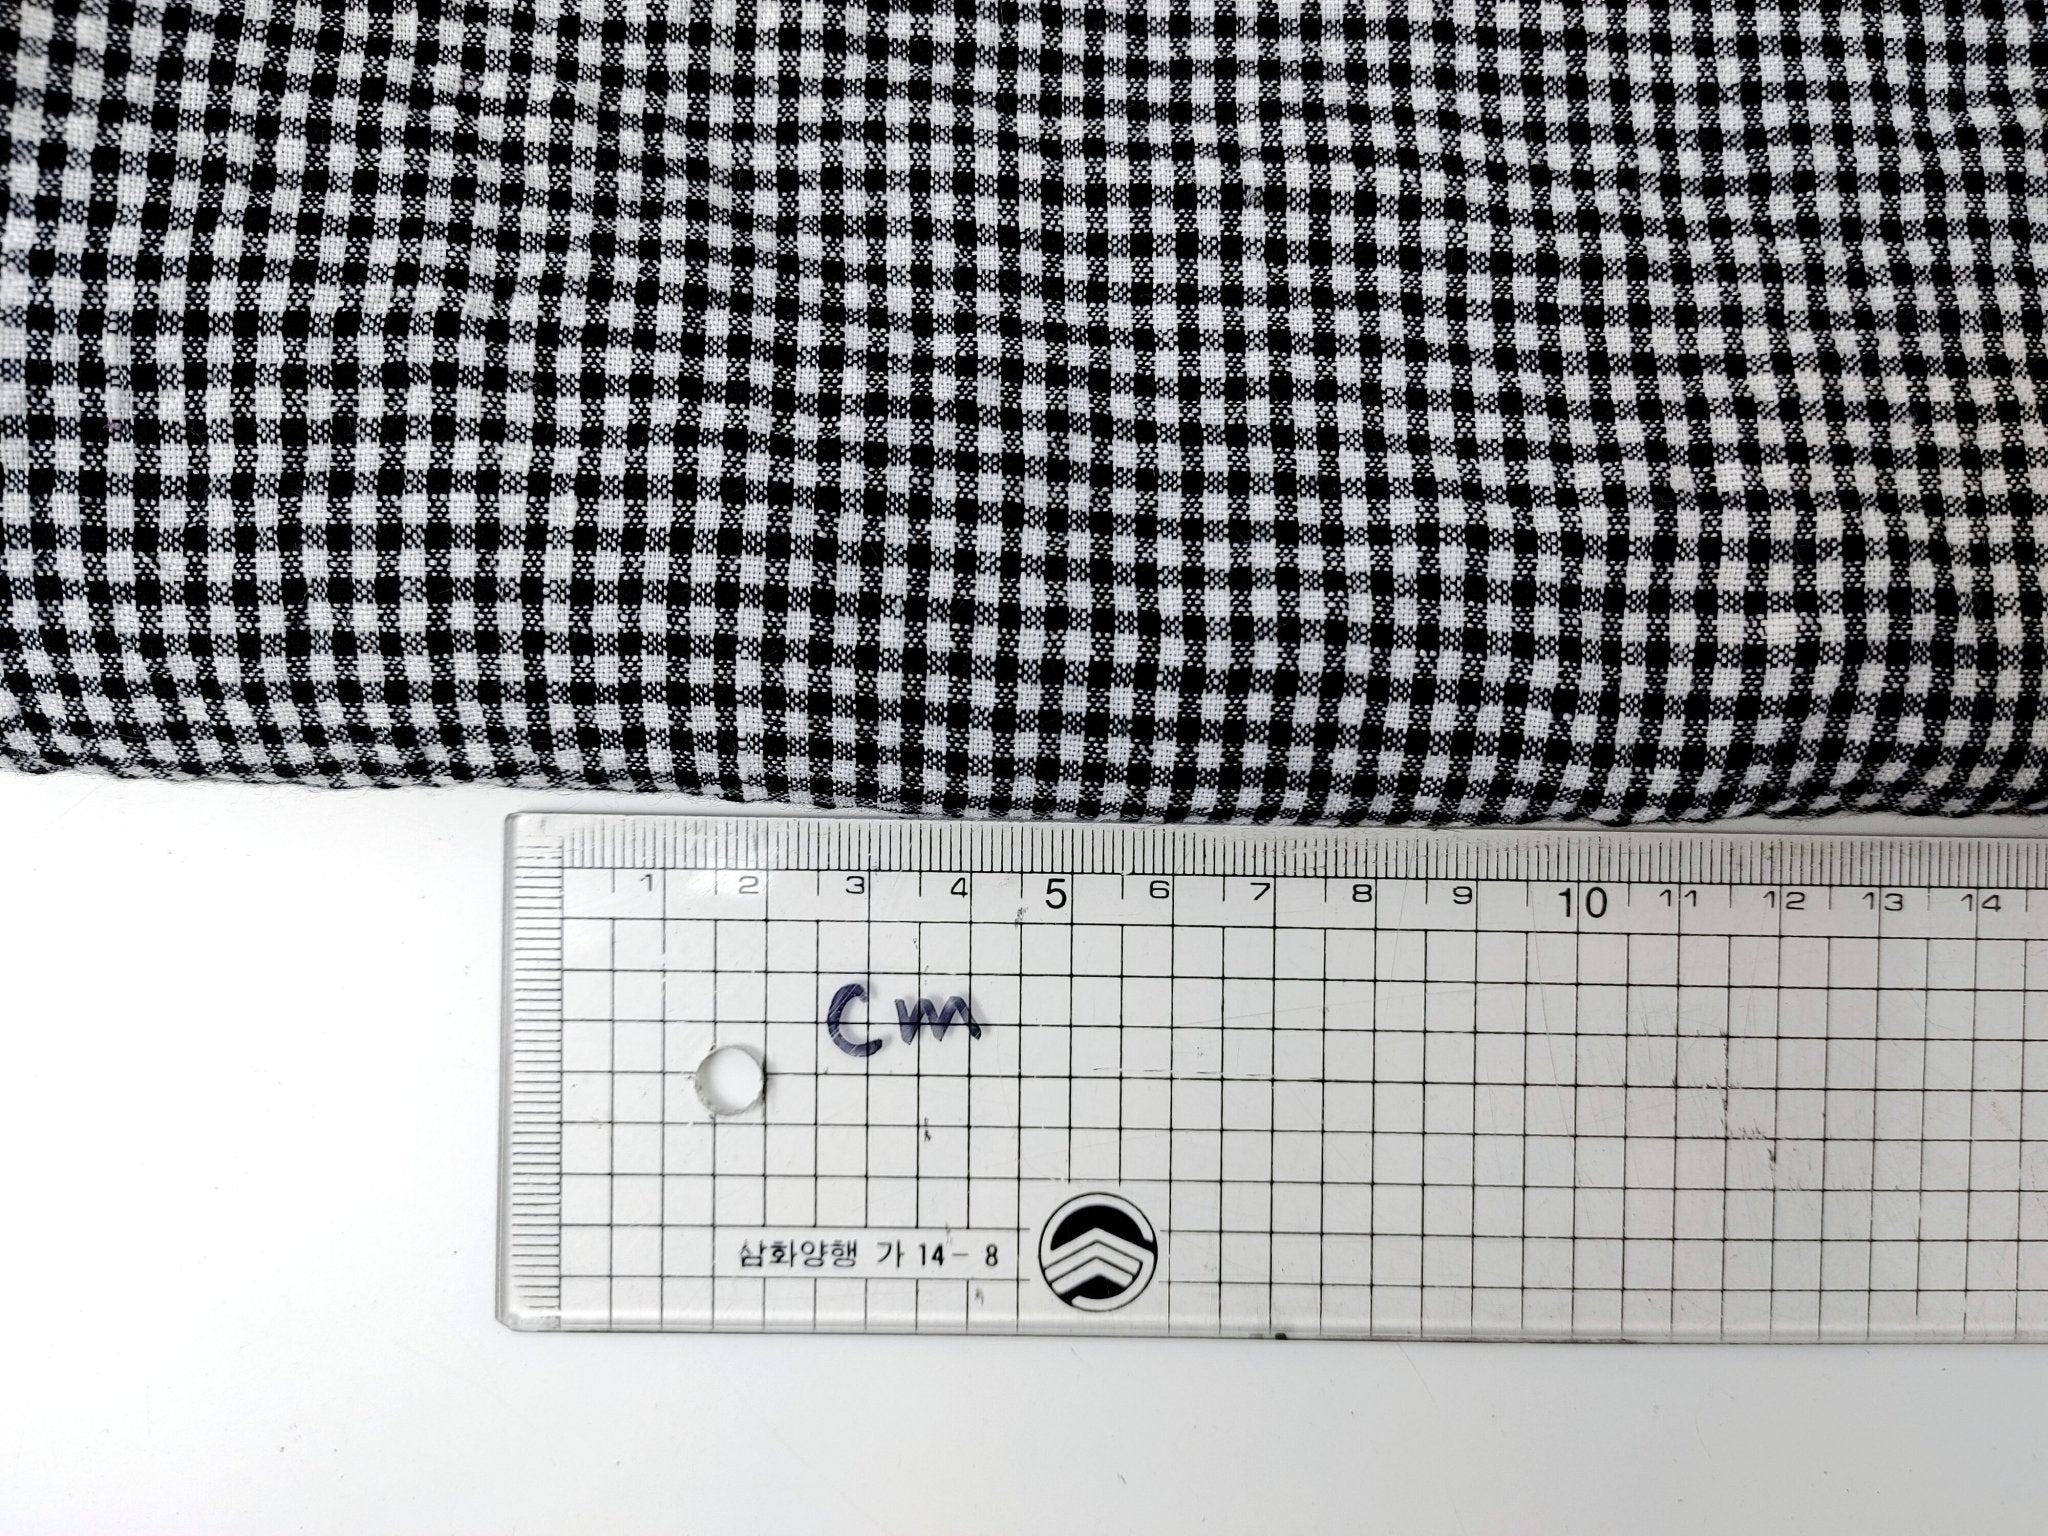 Light Weight Linen Tencel Fabric with Subtle Seersucker Gingham Check in Classic White & Black 6345 - The Linen Lab - Black & White